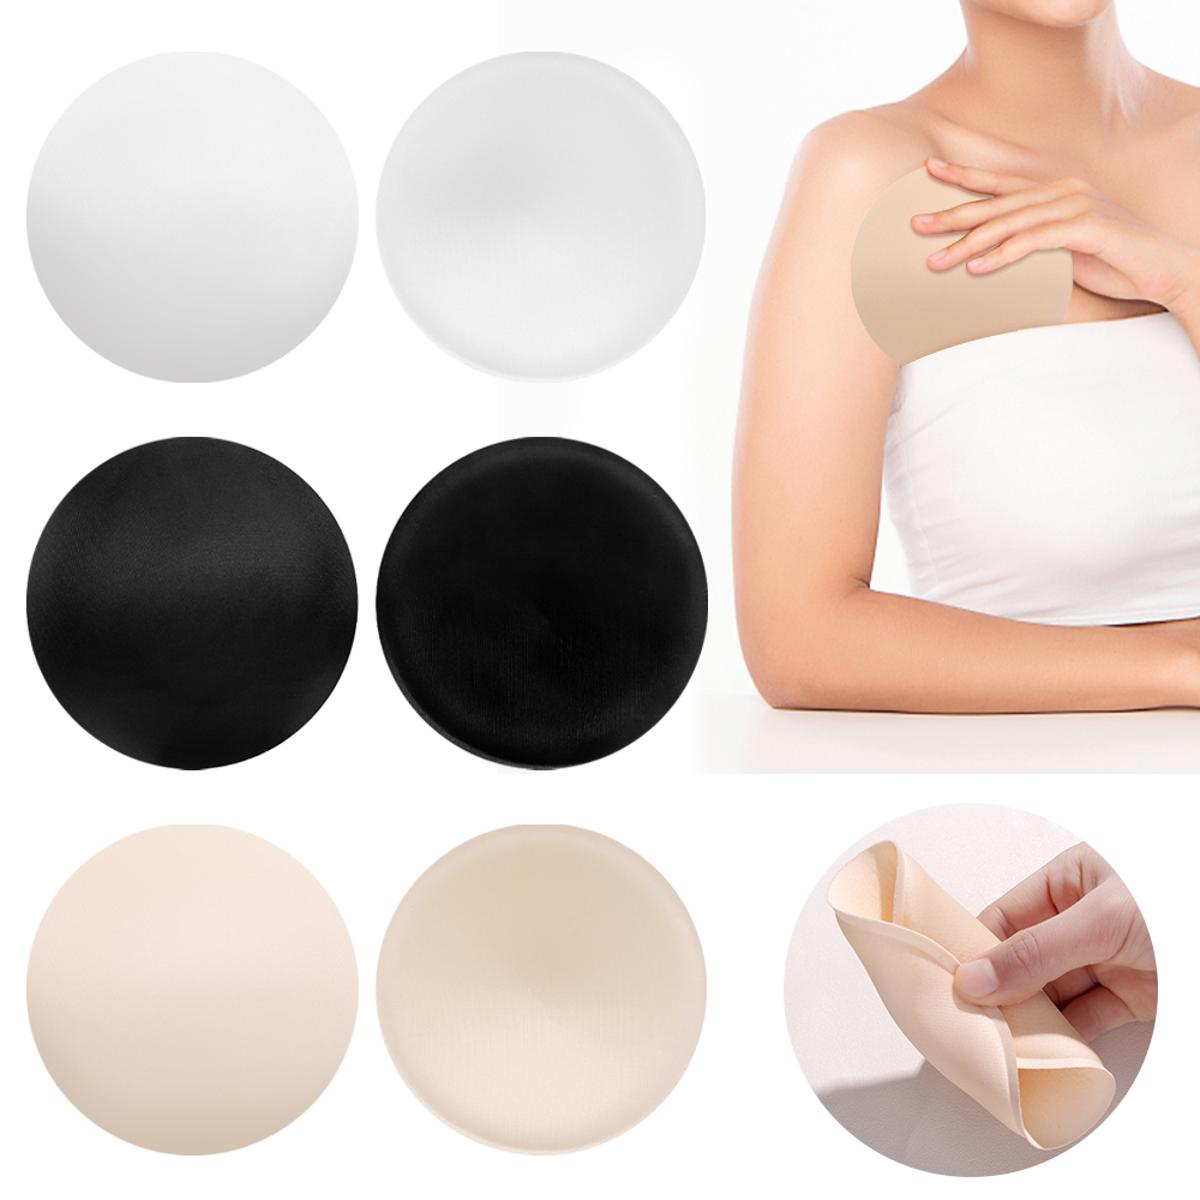 10Pcs Bra Pads Inserts Removable Foam Bra Cups Pads for Swimsuit